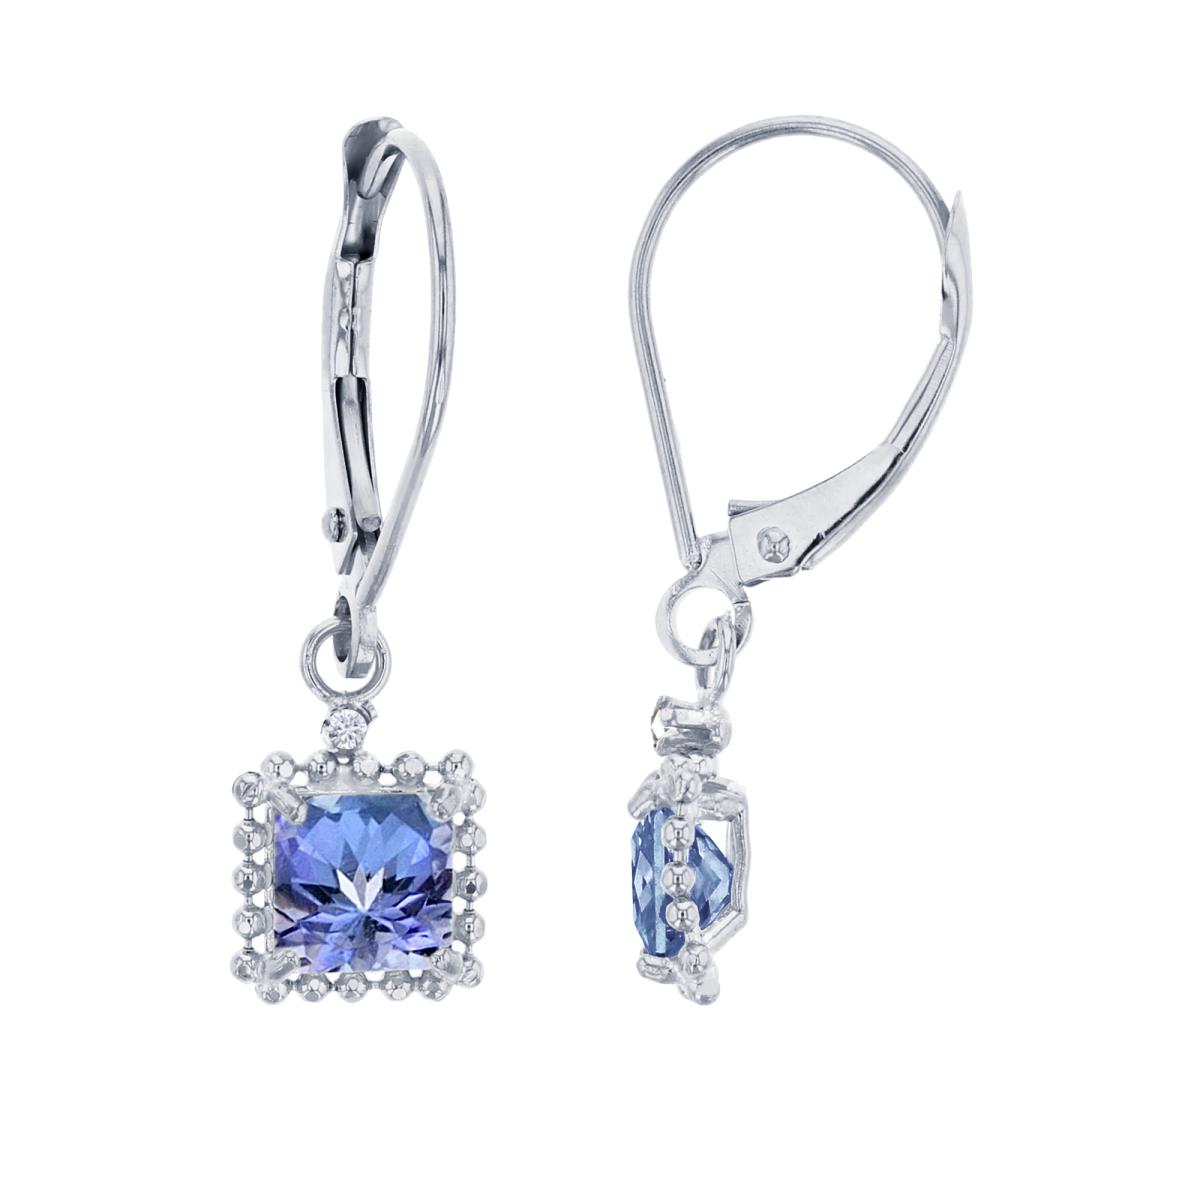 14K White Gold 1.25mm Rd Created White Sapphire & 5mm Sq Tanzanite Bead Frame Drop Lever-Back Earring